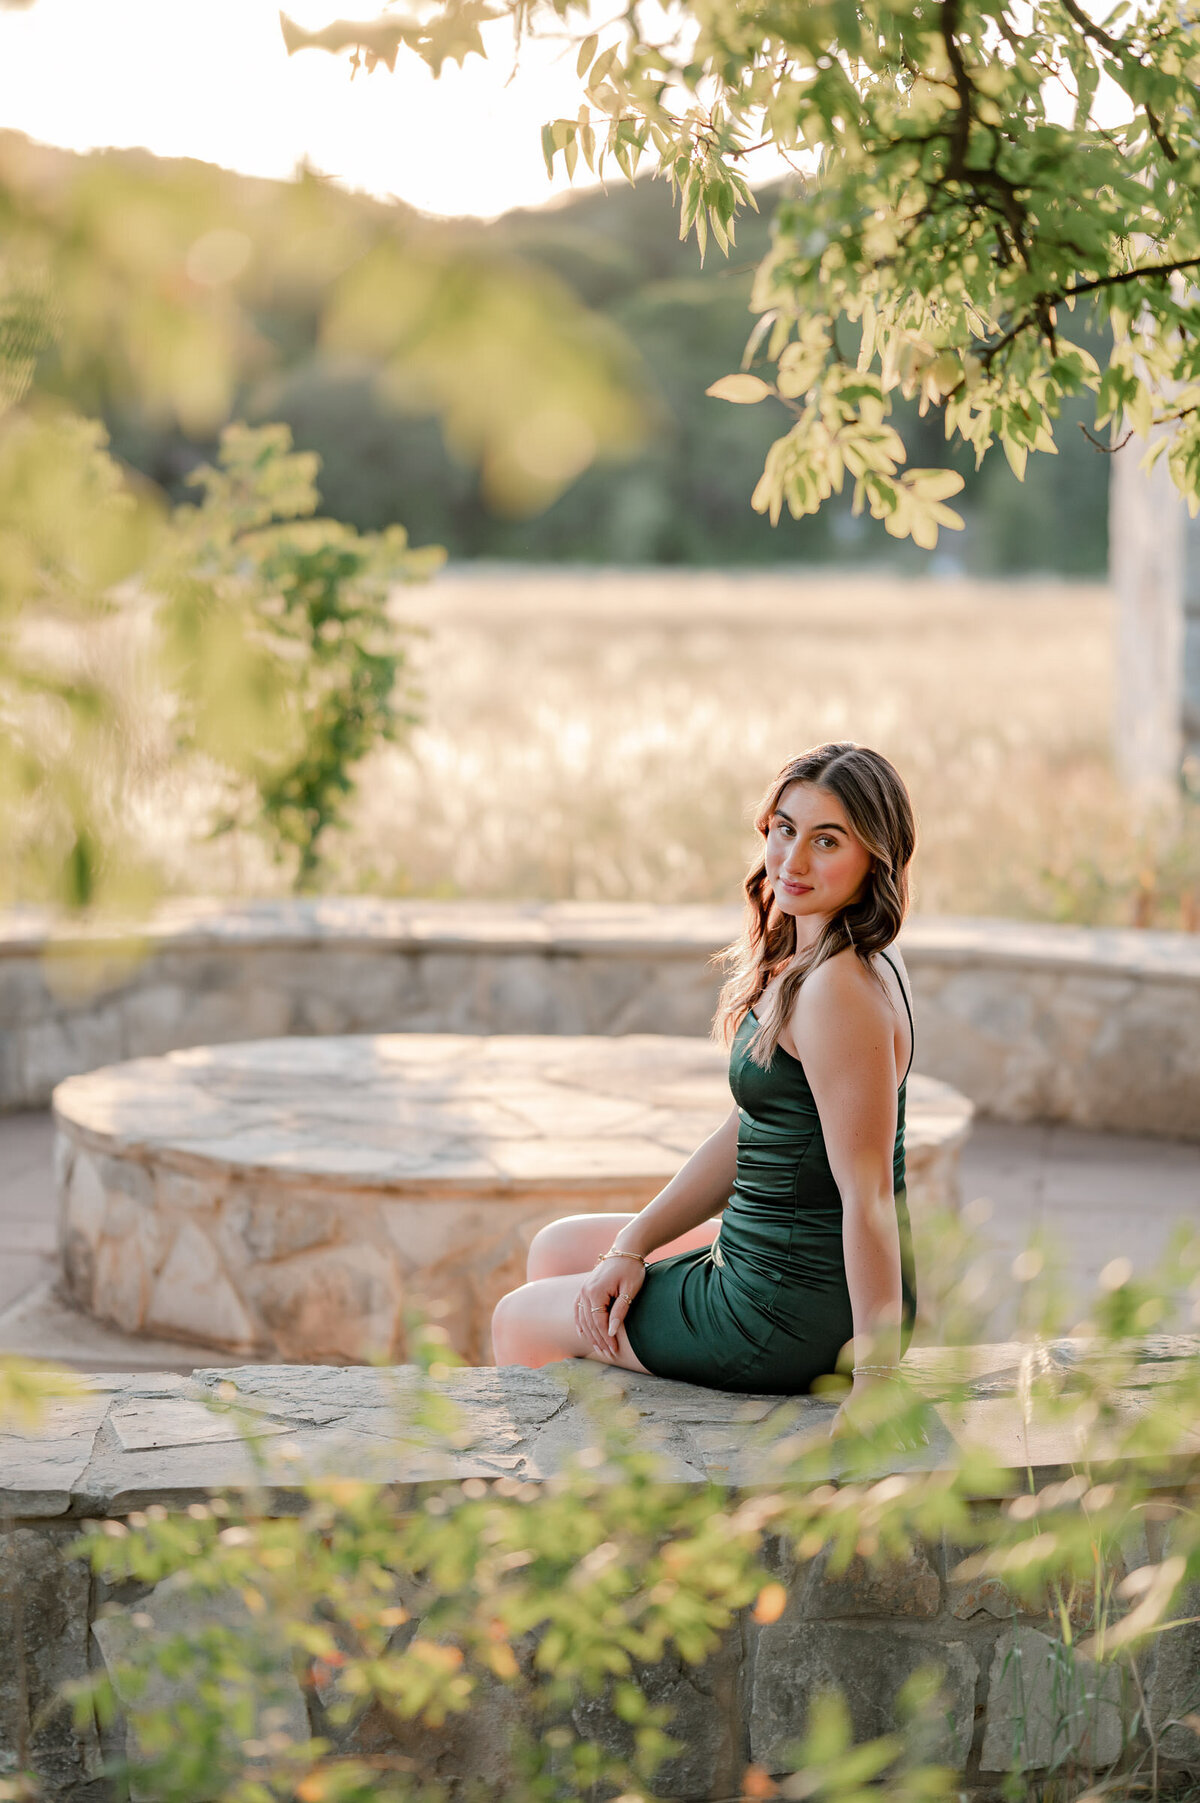 Glowing image through the trees of a senior girl in a green dress looking over her shoulder at the camera.